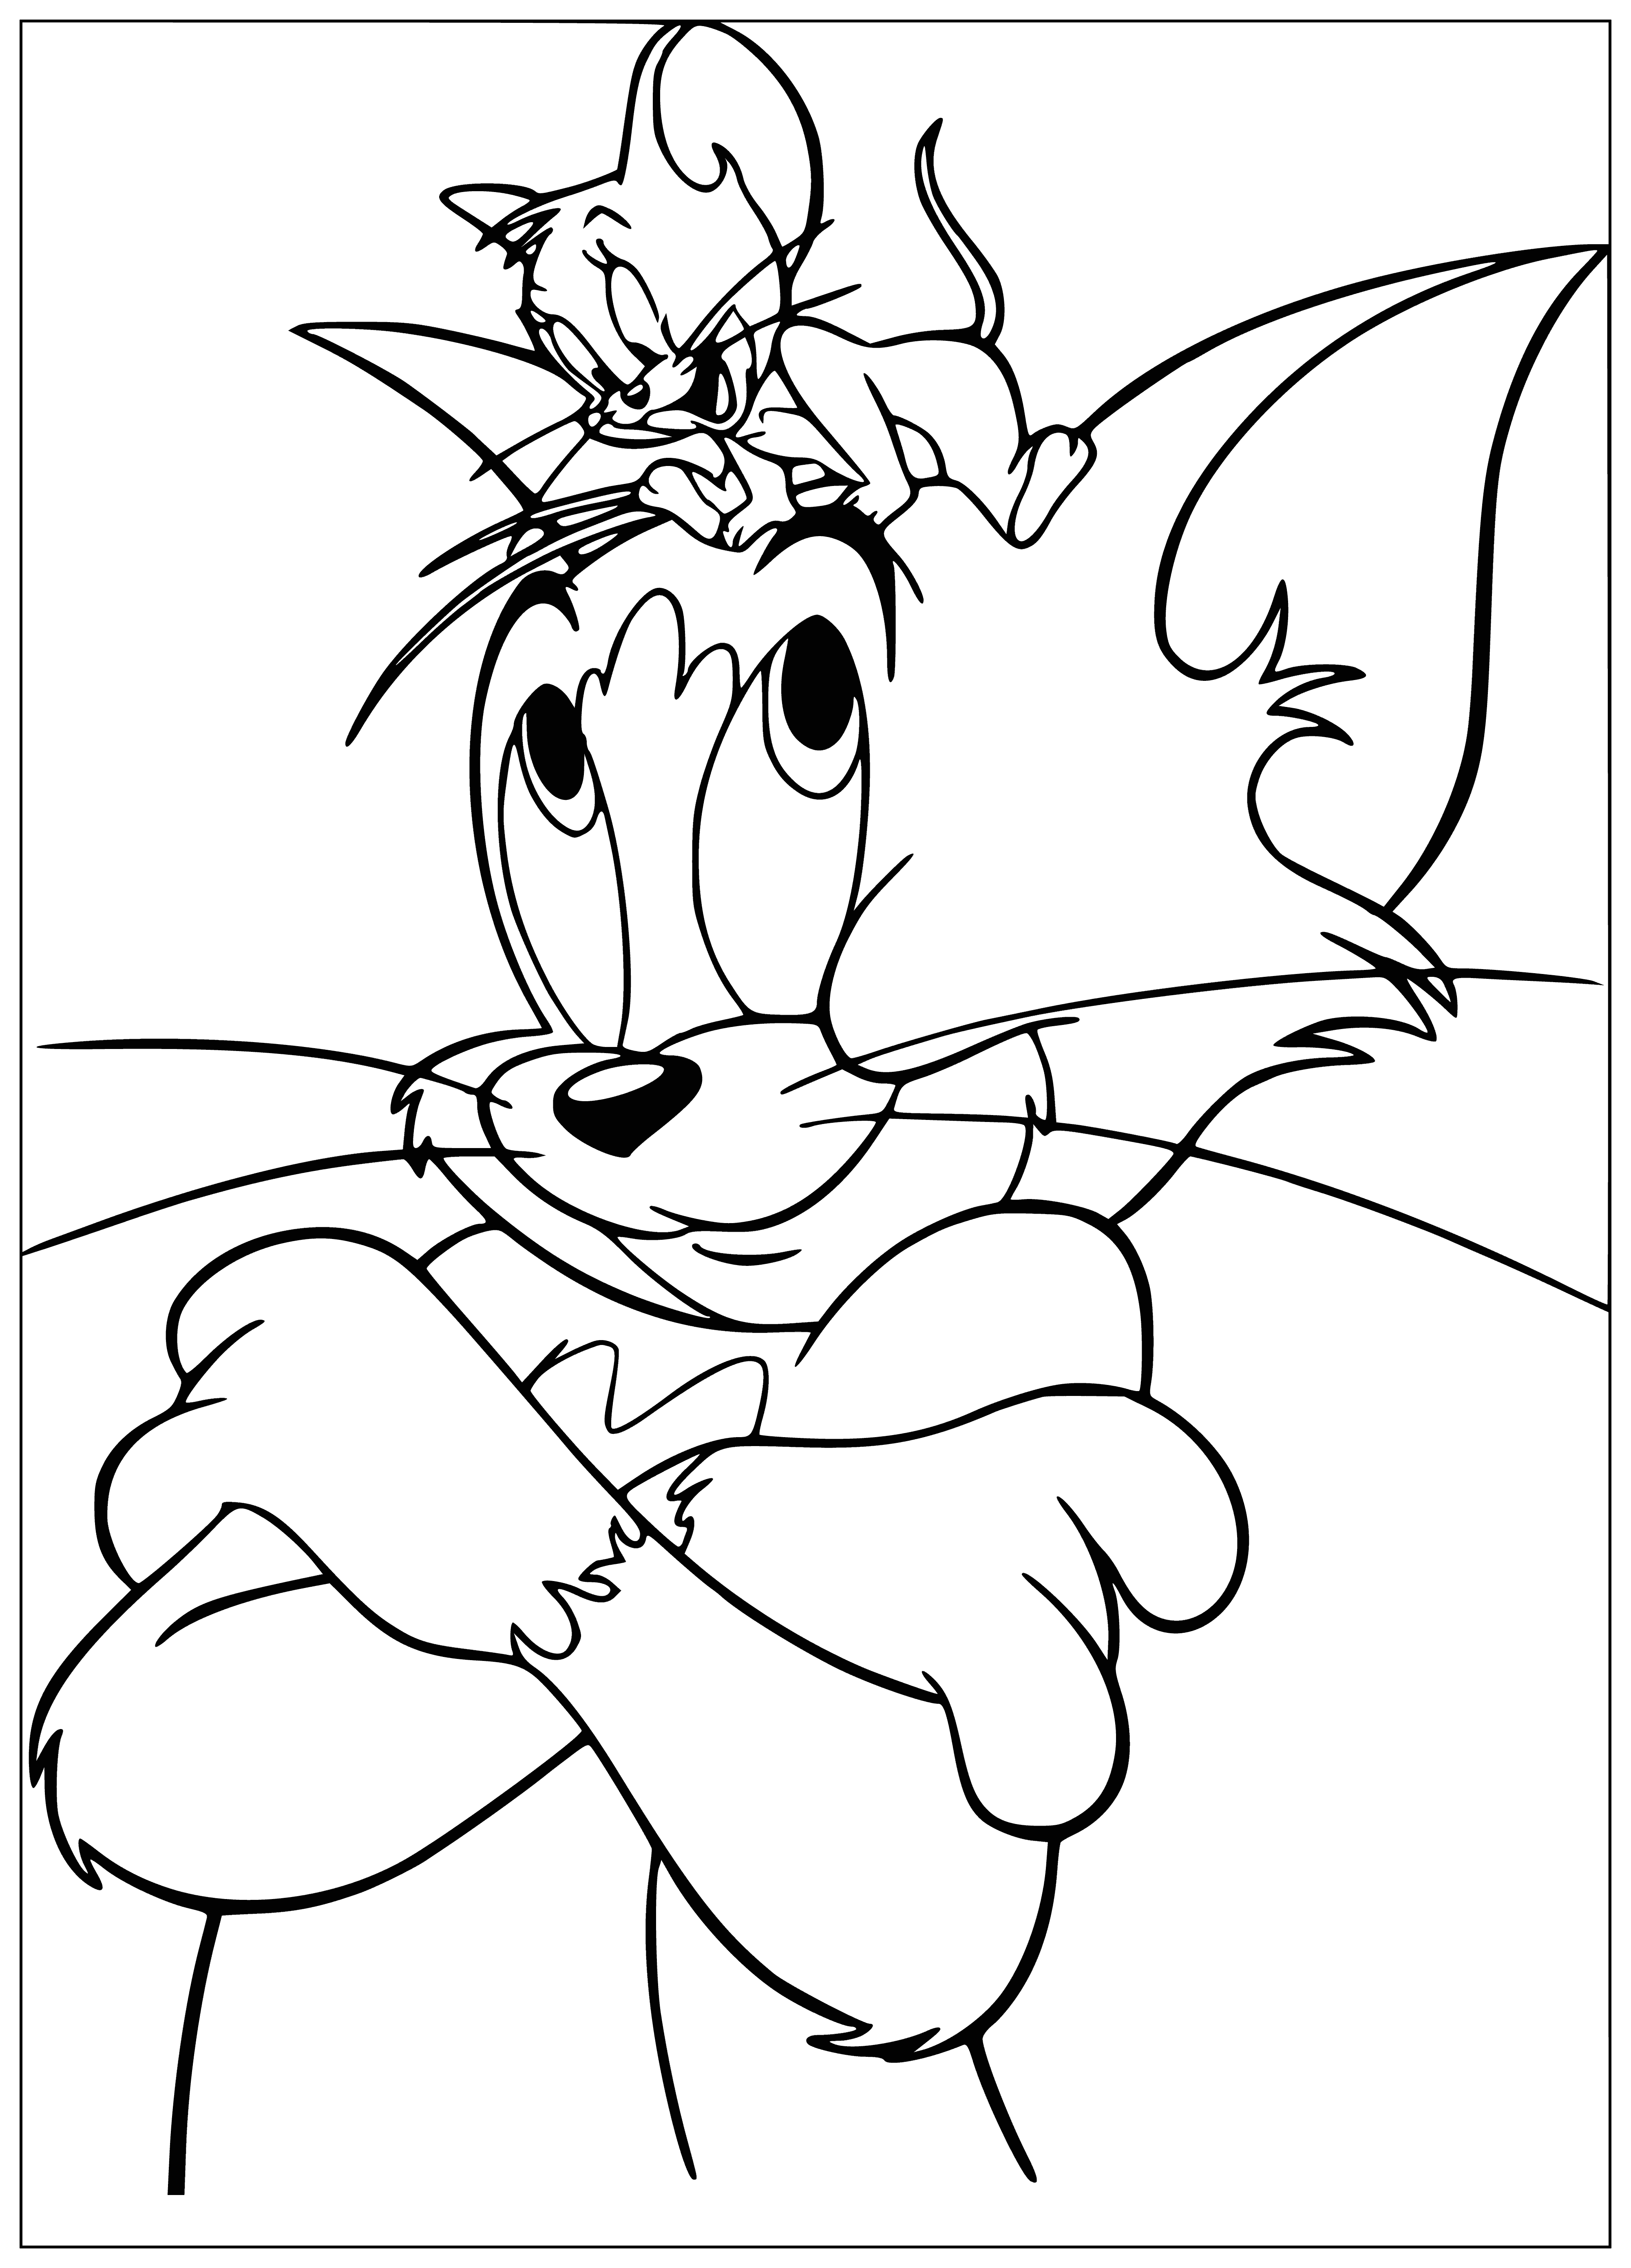 coloring page: Tom is holding a mouse, Jerry, by the tail, trying to stop him from getting to a goldfish bowl.